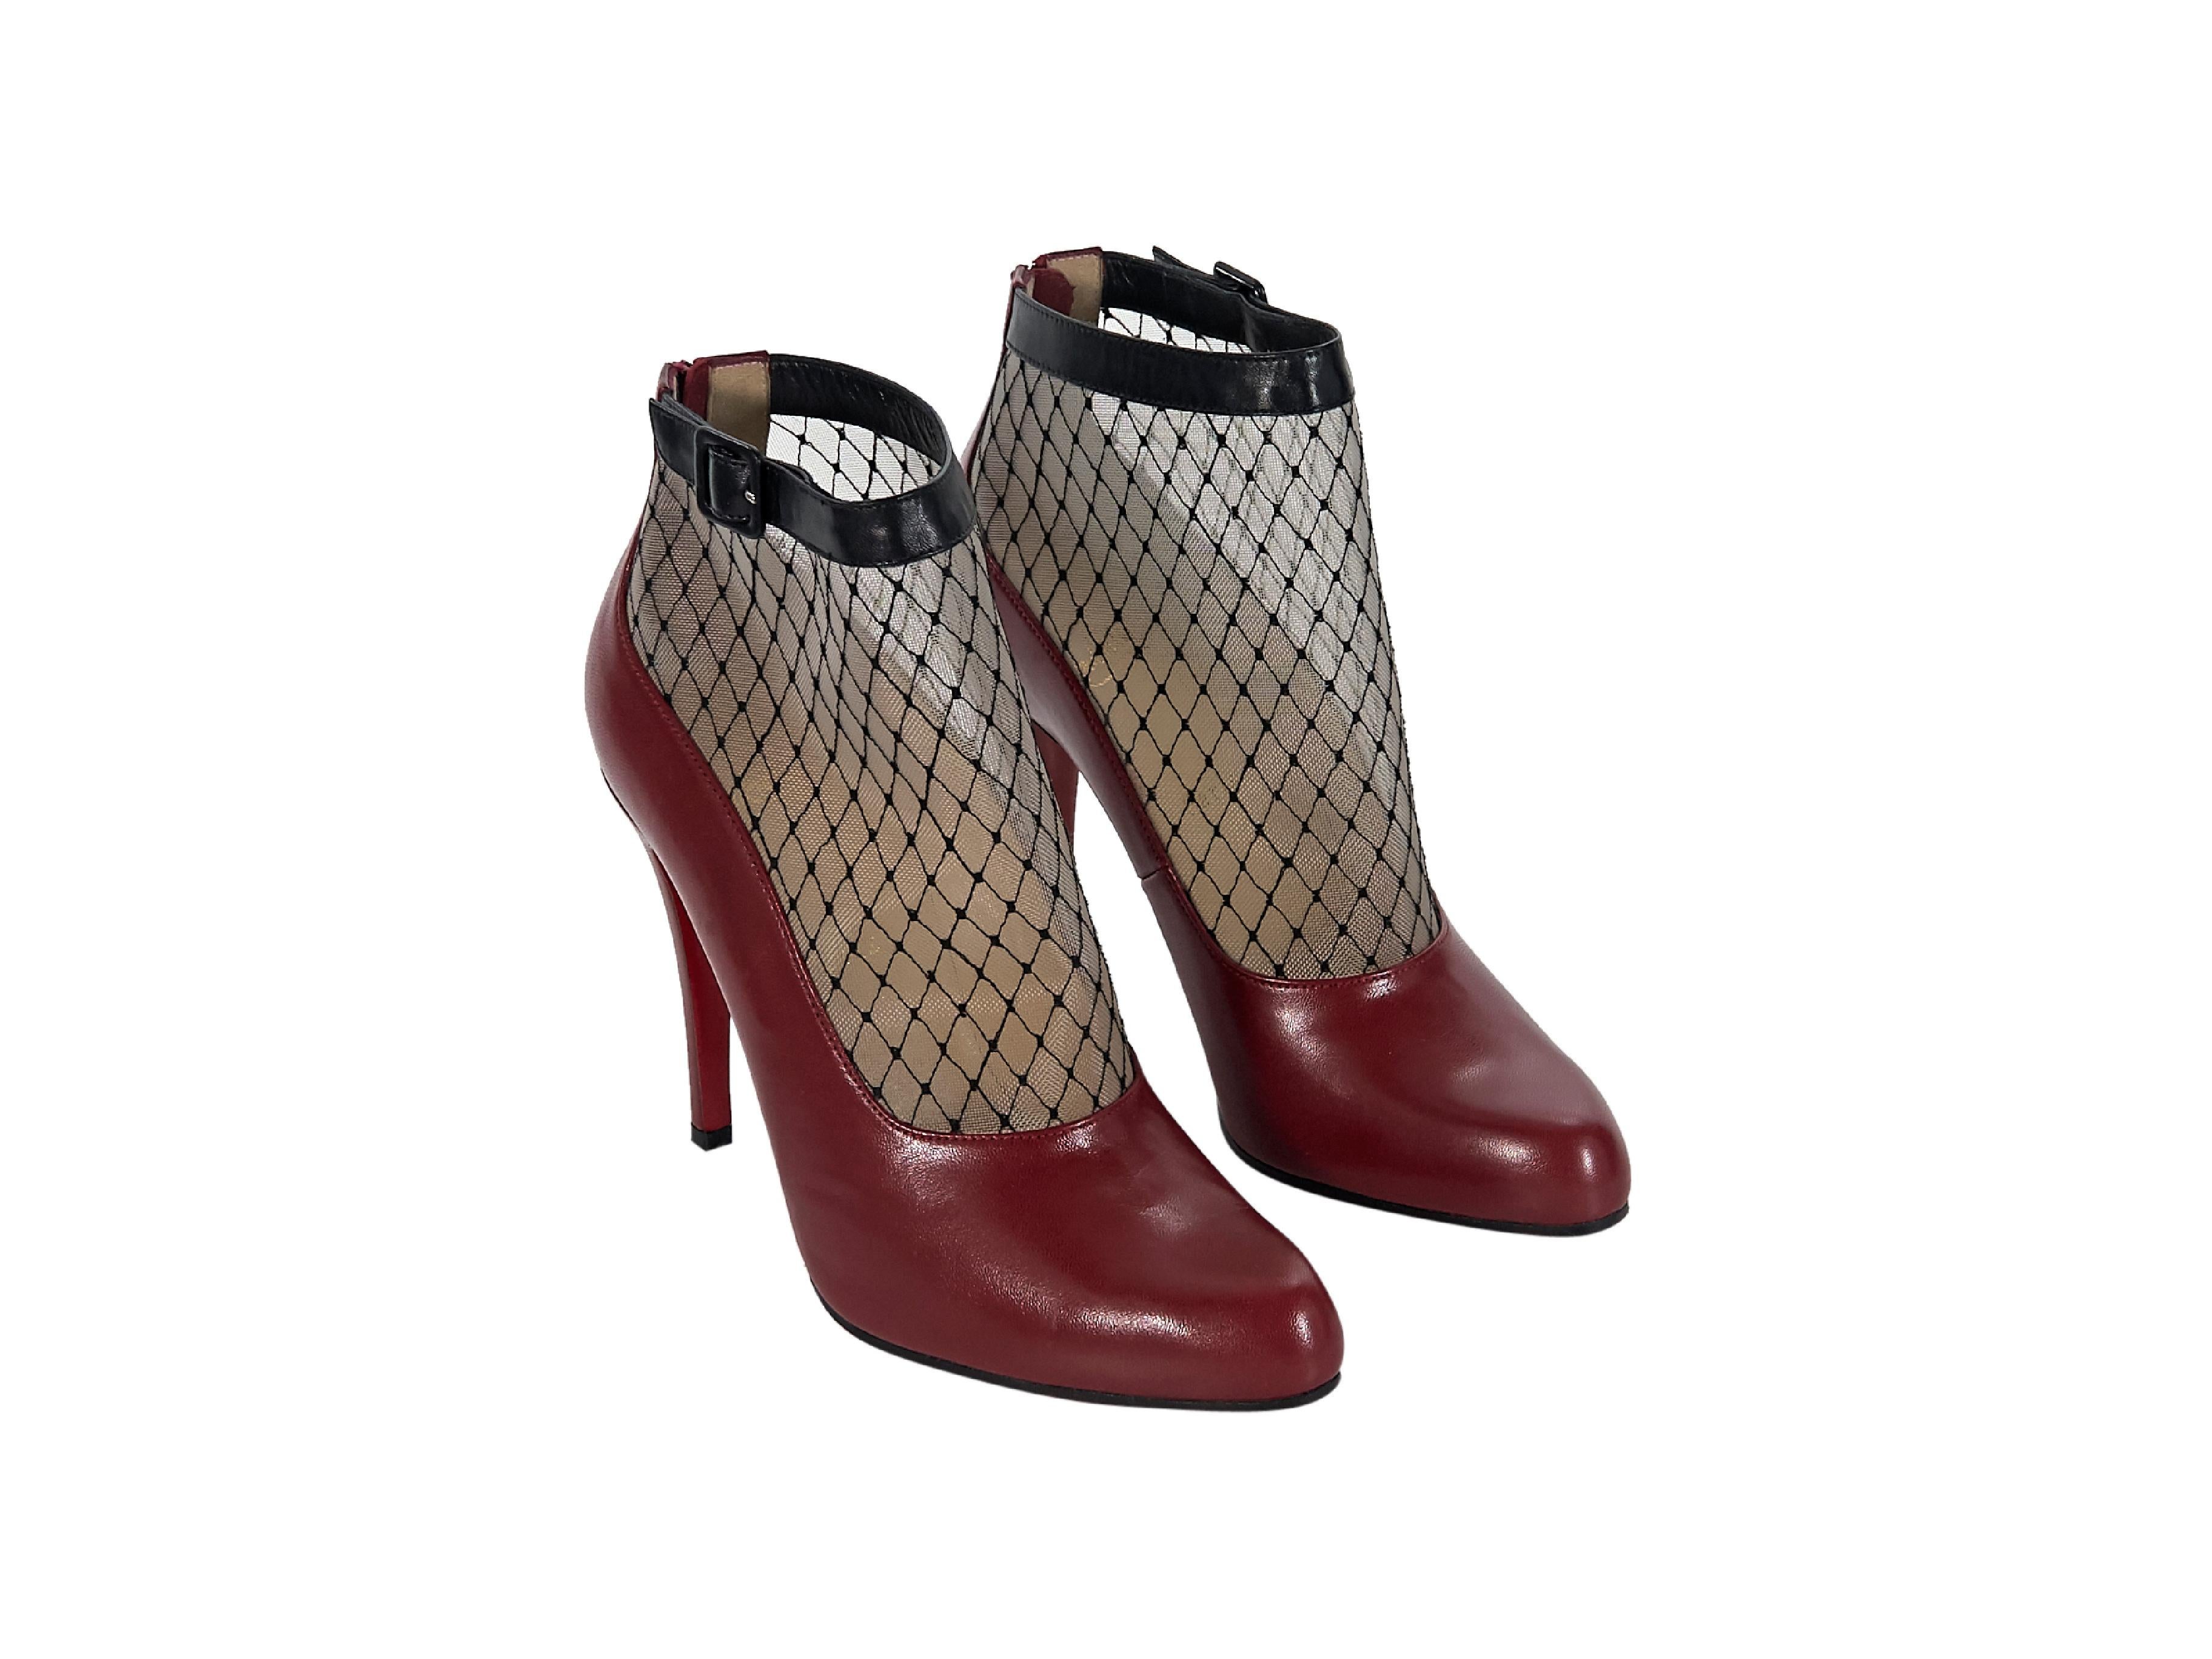 Product details:  Red leather fishnet ankle boots by Christian Louboutin.  Trimmed with a buckle strap detail.  Back zip closure.  Round toe.  Iconic red sole.  Label size IT 39.  4.75